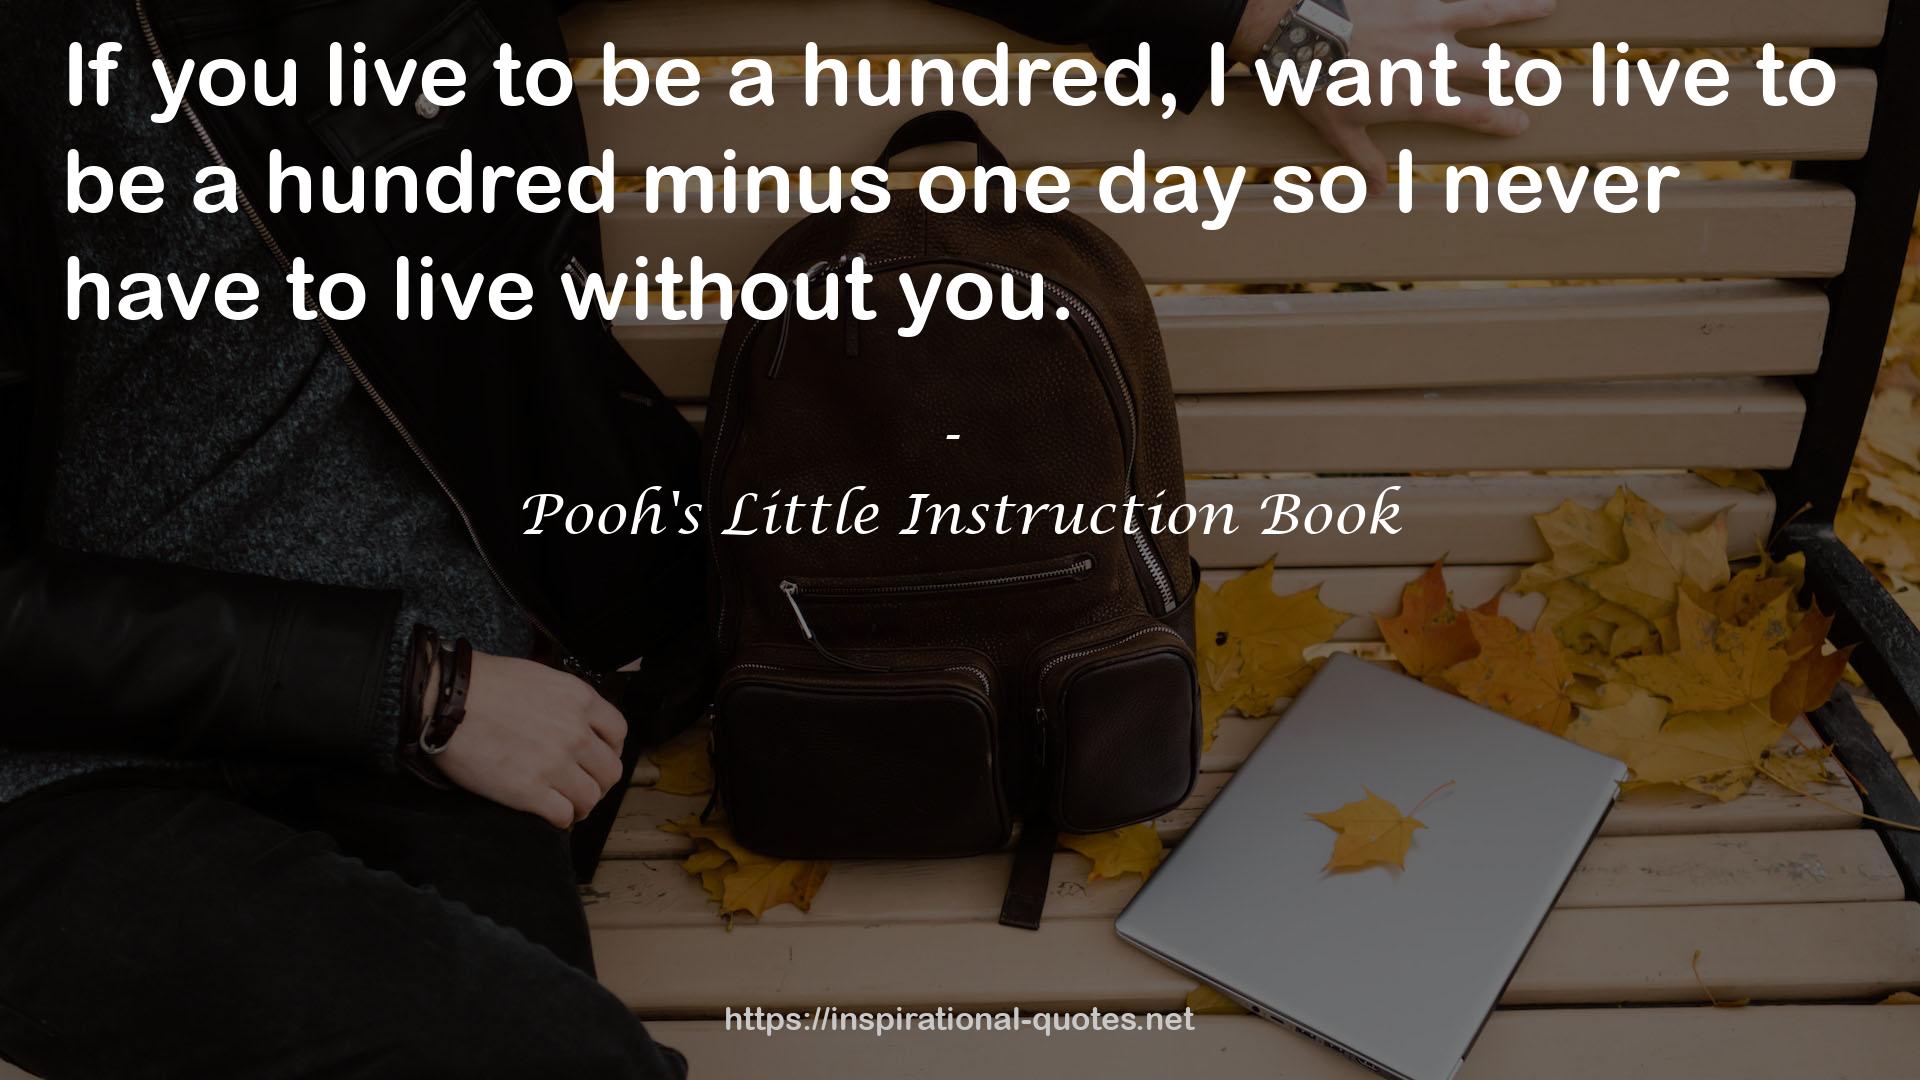 Pooh's Little Instruction Book QUOTES